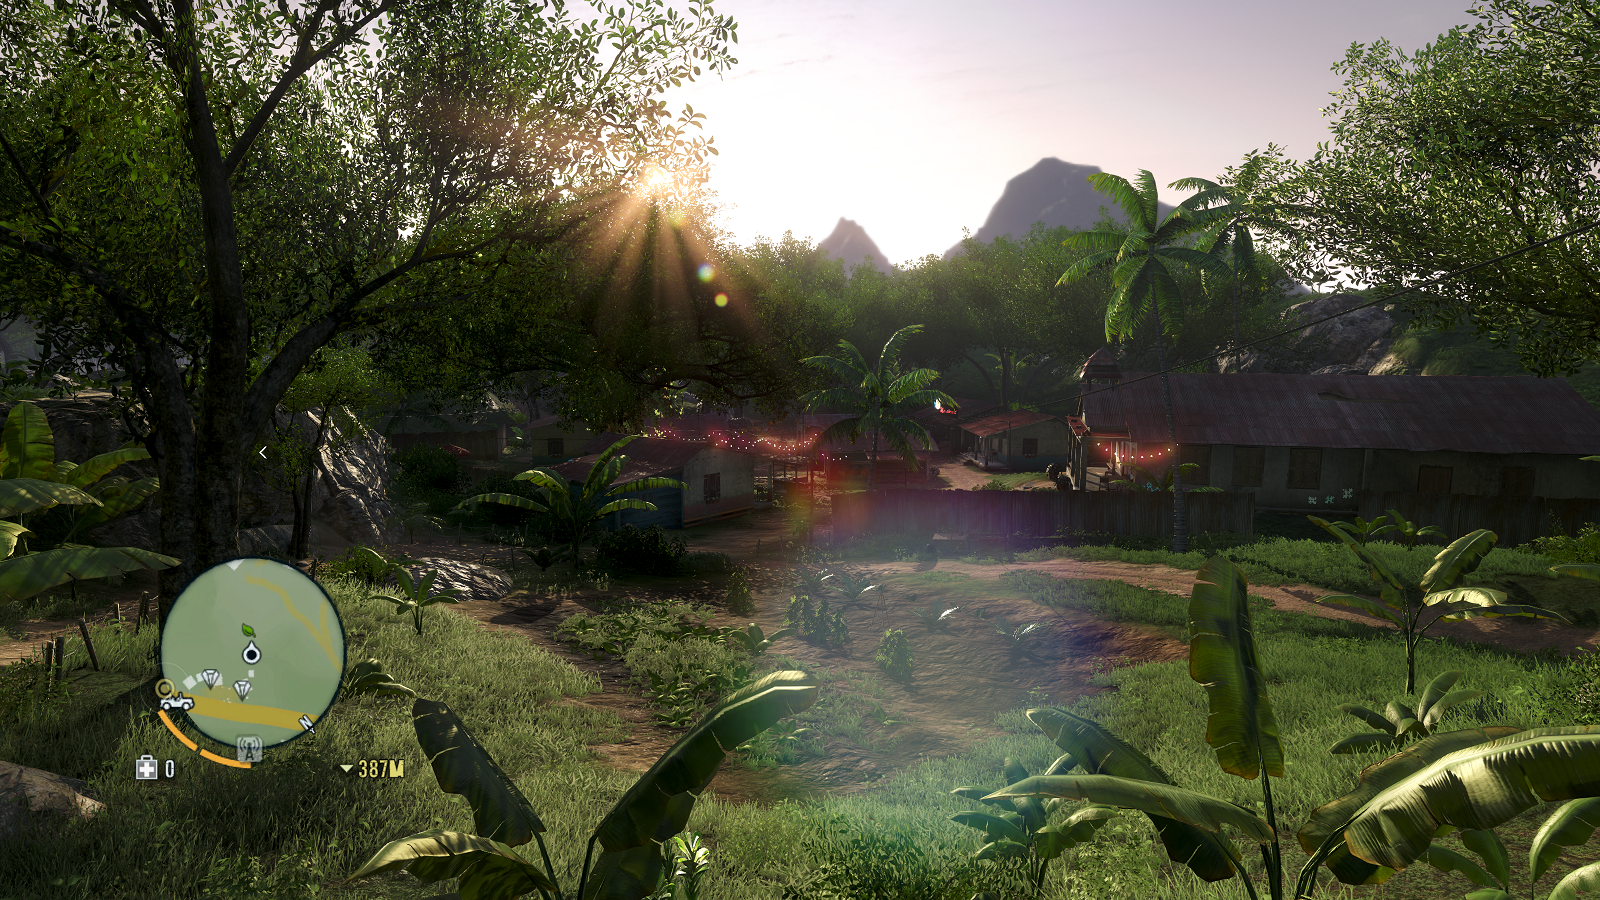 farcry3_d3d112012-11-kpo6i.png